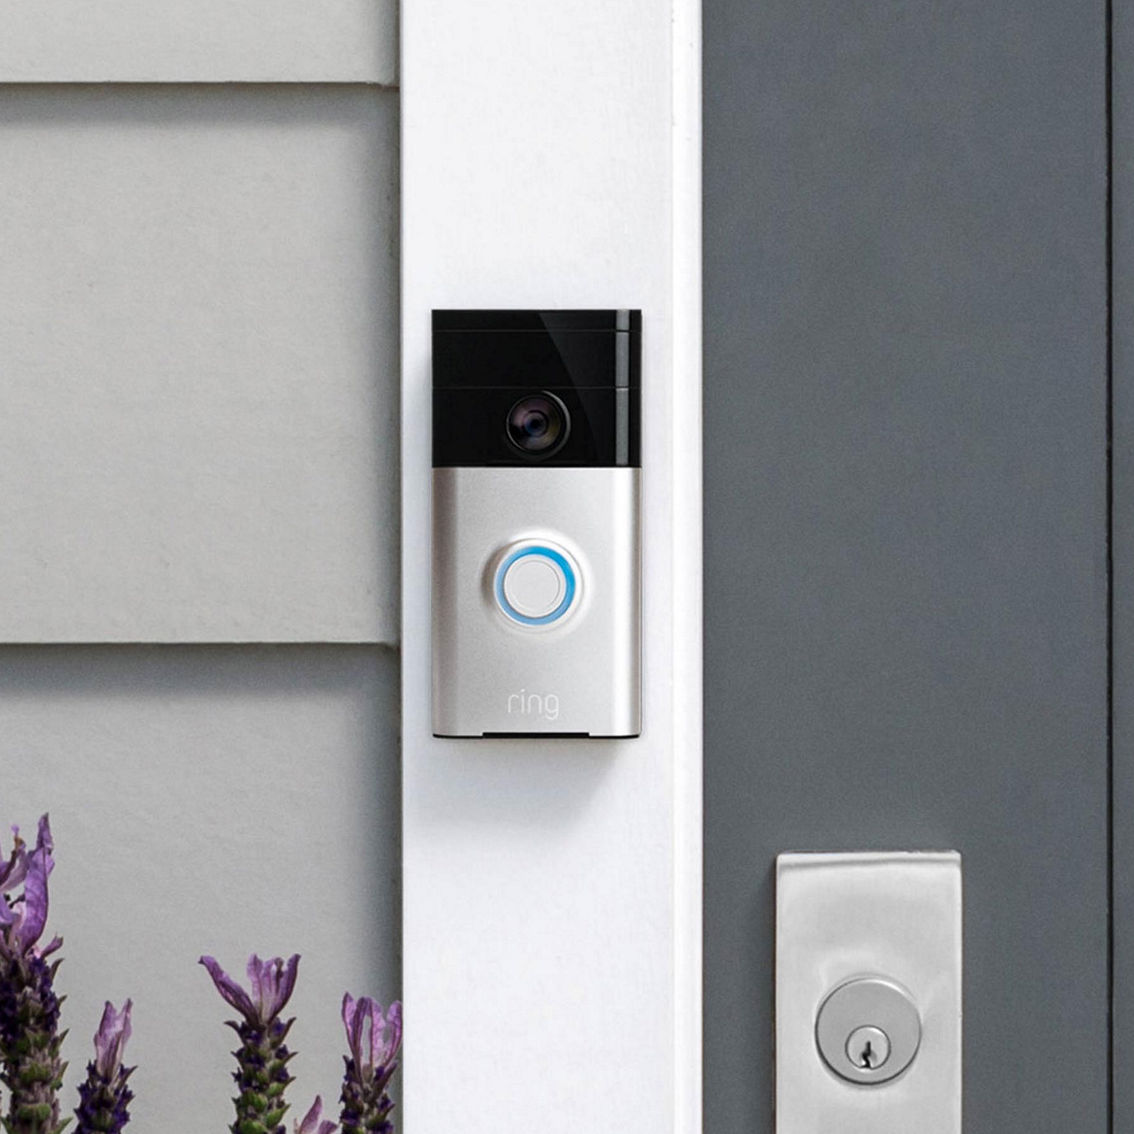 Ring Bot Home Automation Video Doorbell - Image 2 of 2